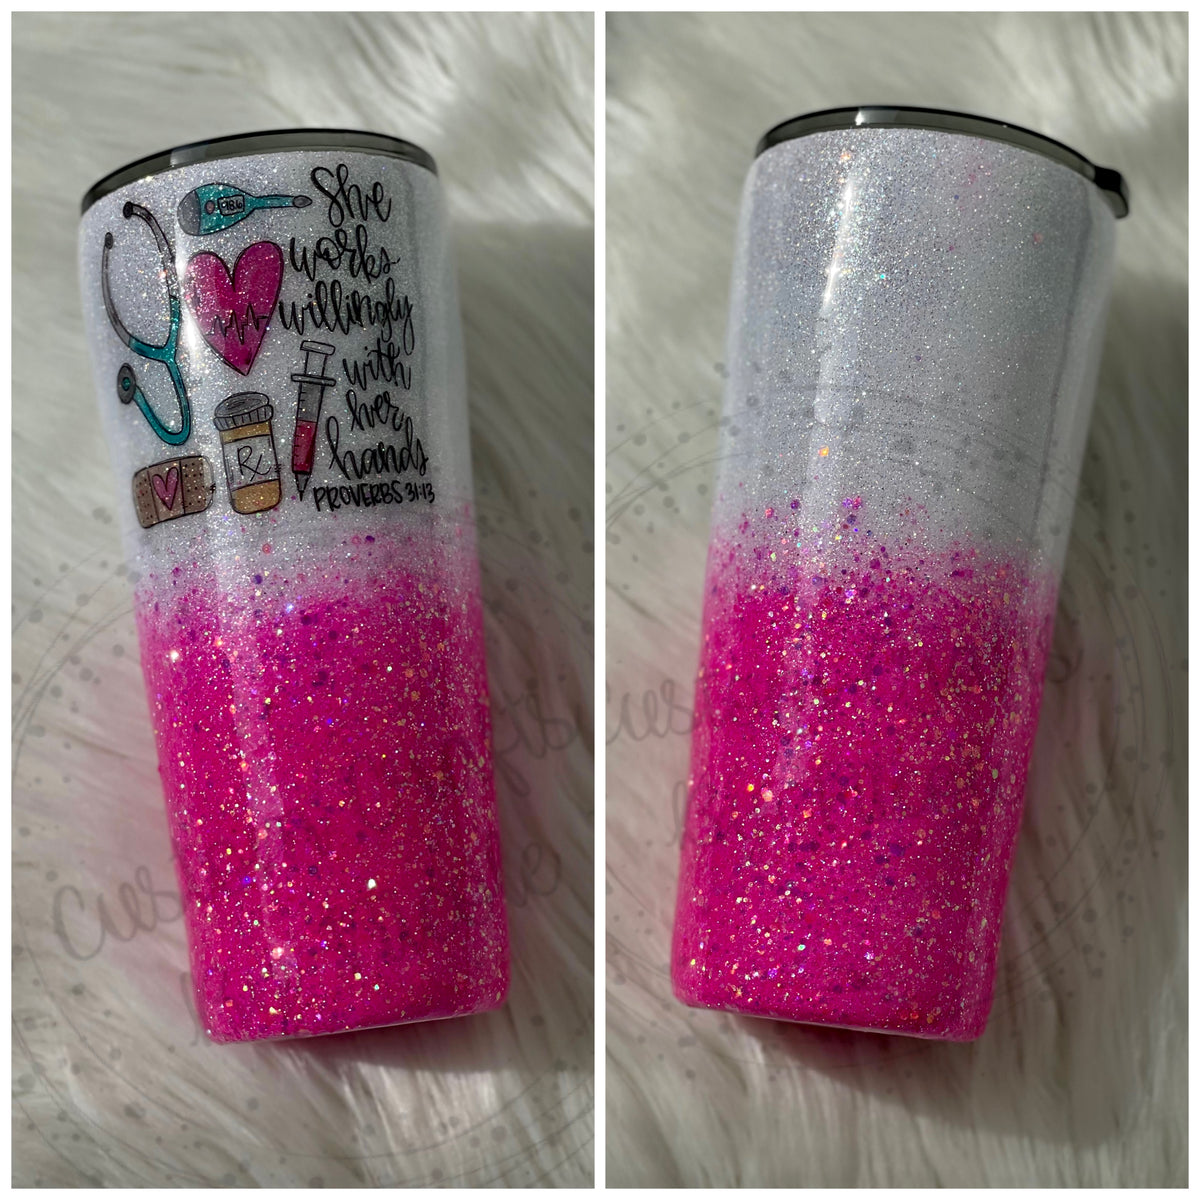 22oz Slim tumbler “She works willingly with her hands”